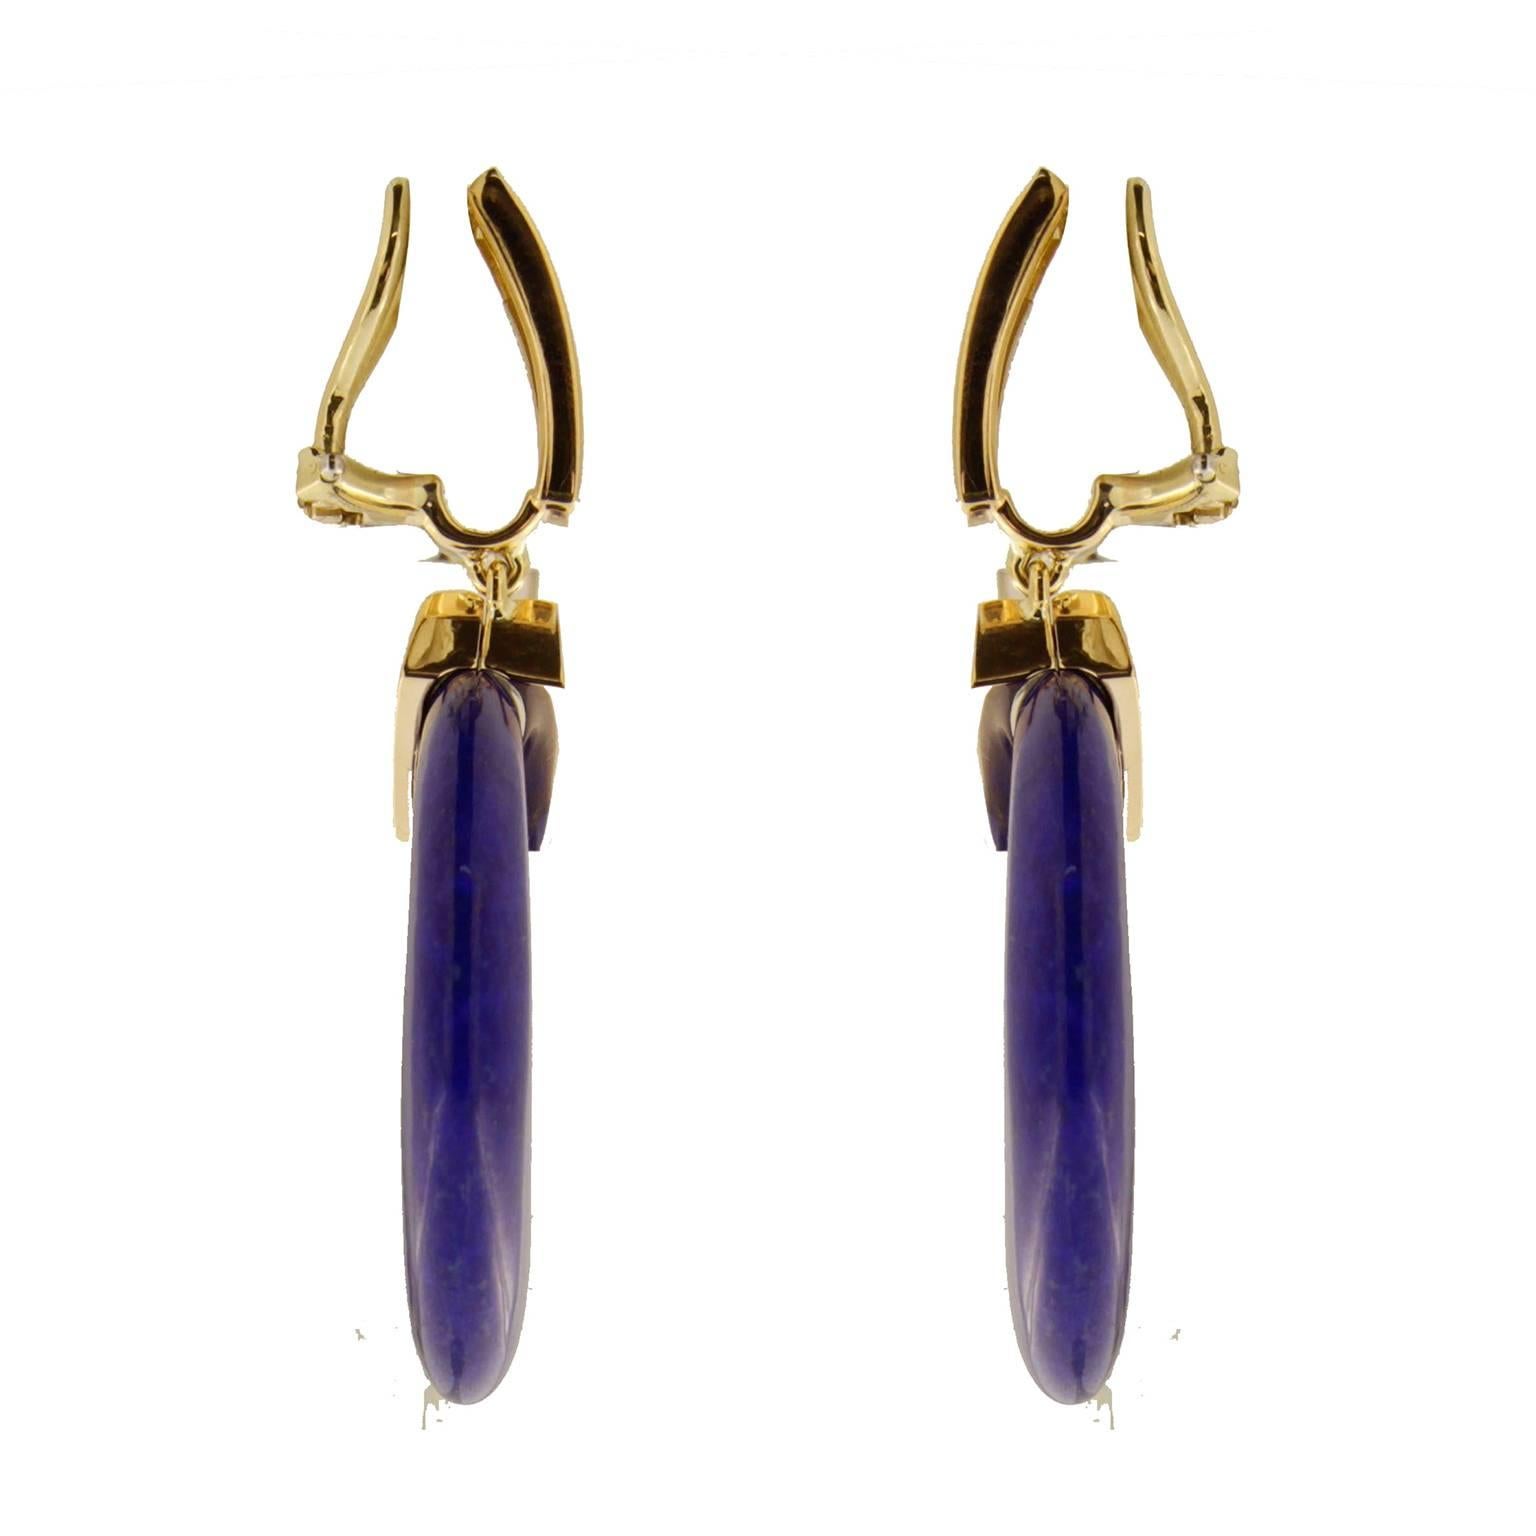 These dangling earrings feature special cut lapis lazuli and 0.61ctw of micro pave set diamonds. They are mounted in 18kt yellow gold and are finished with clip-backs.